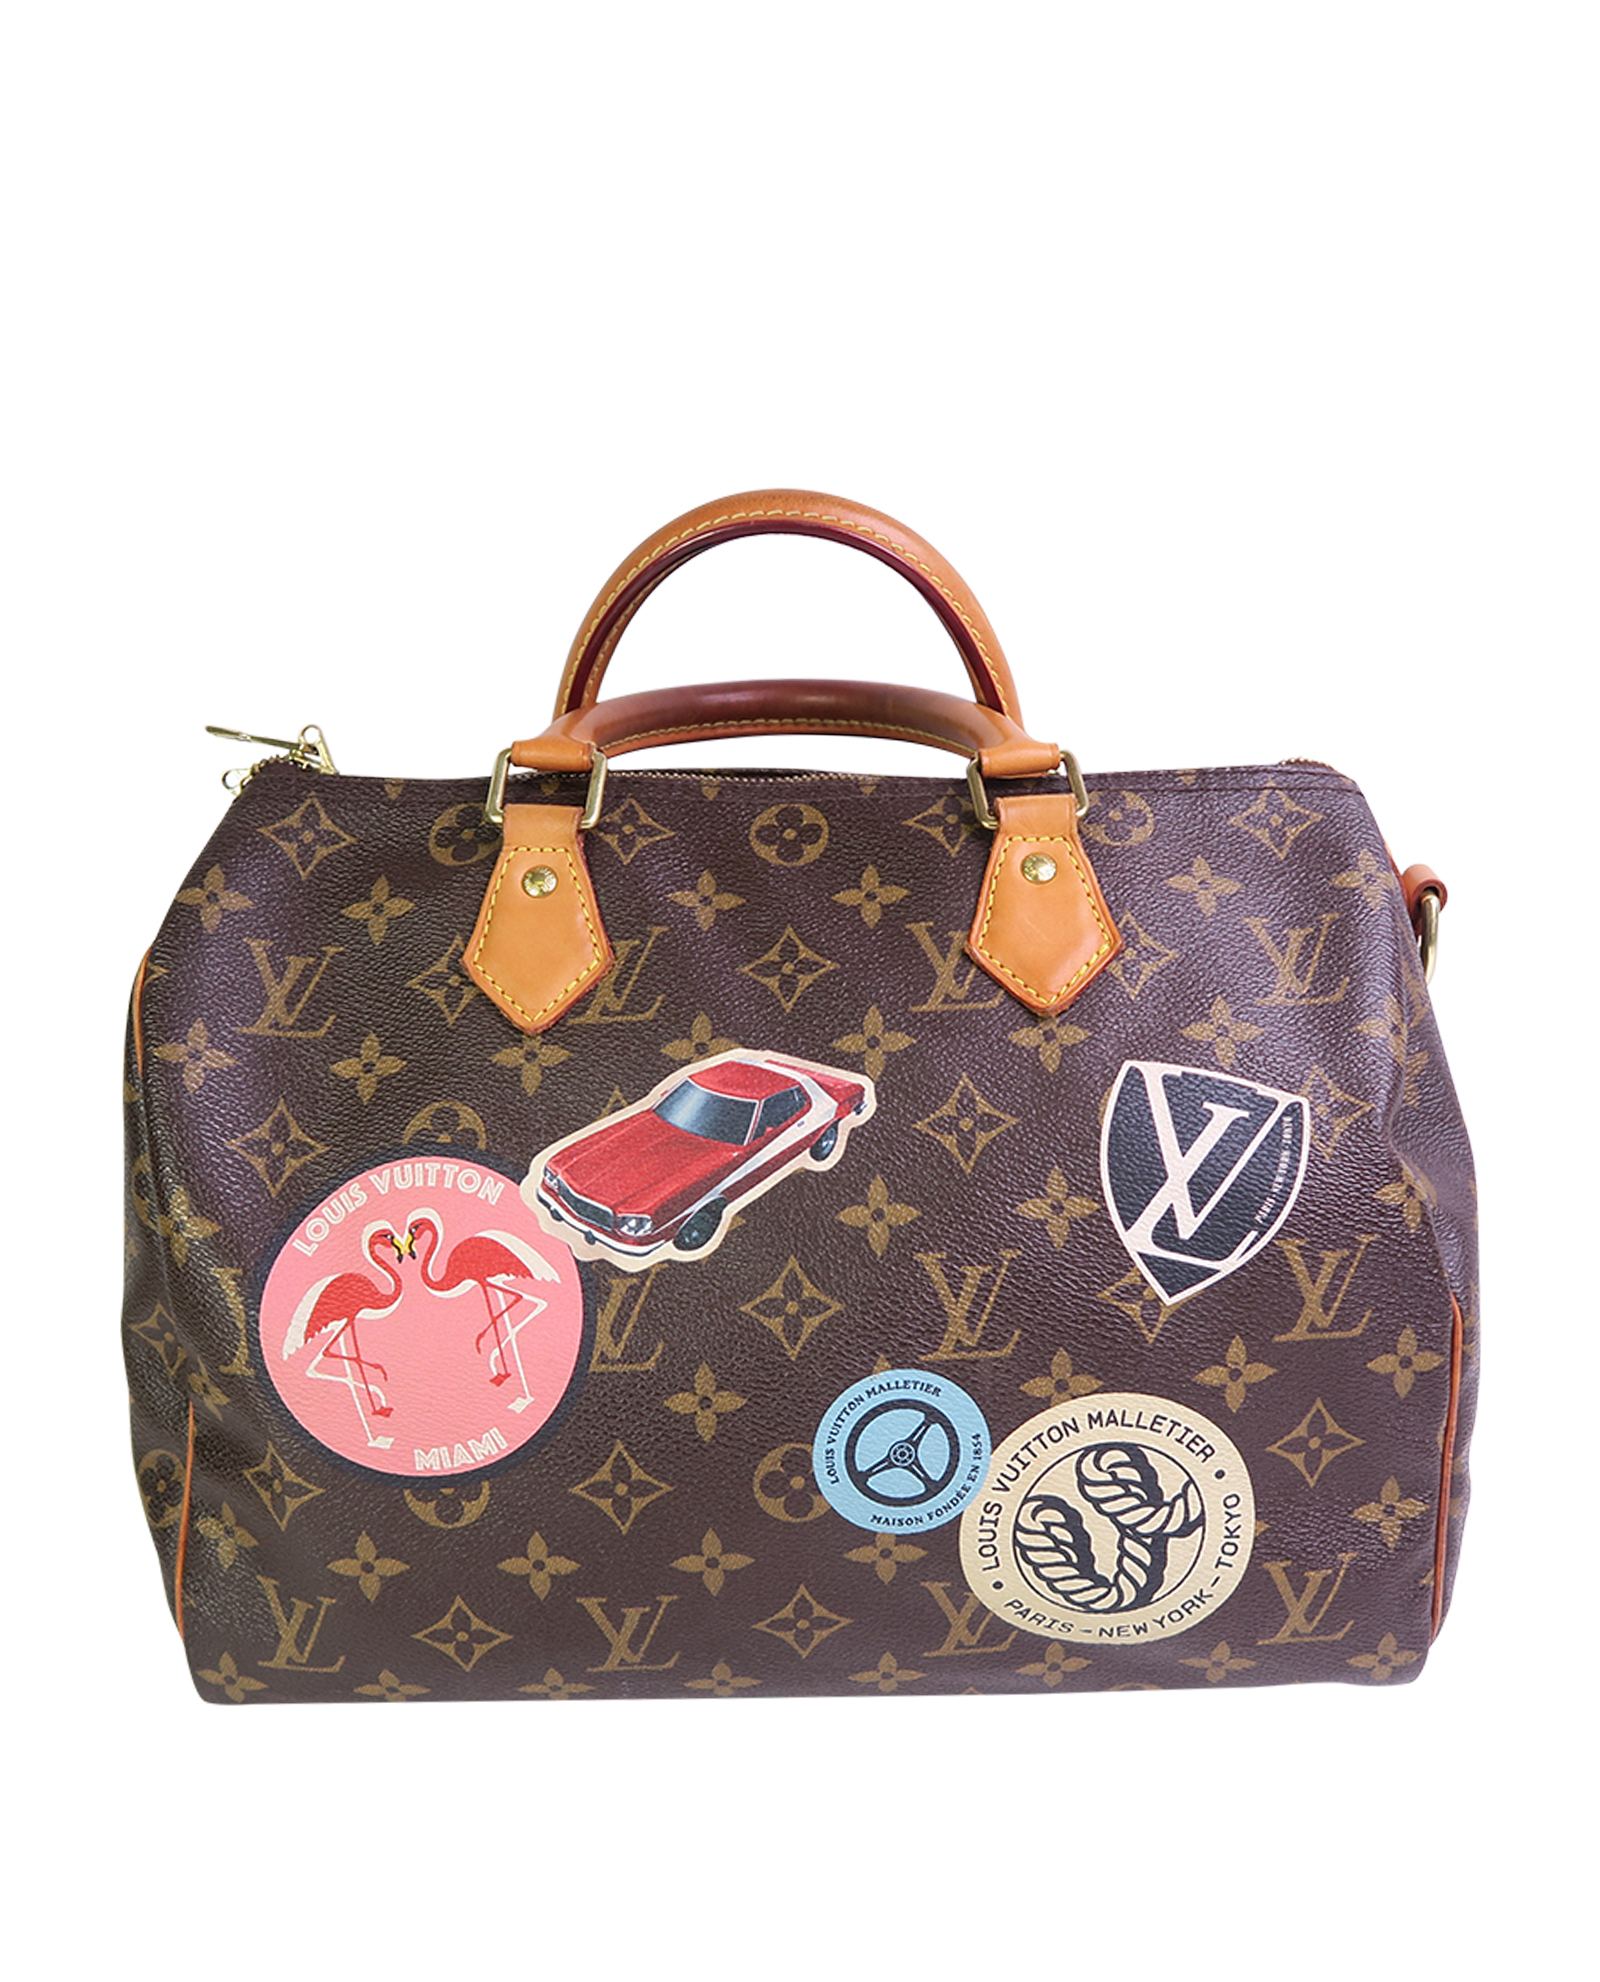 Designer Exchange Ltd - One of your favourites is back in stock 😉 Louis  Vuitton's Speedy 35 Bandouliere, with a saving of €300 on current RRP 🤭   35-bandouliere